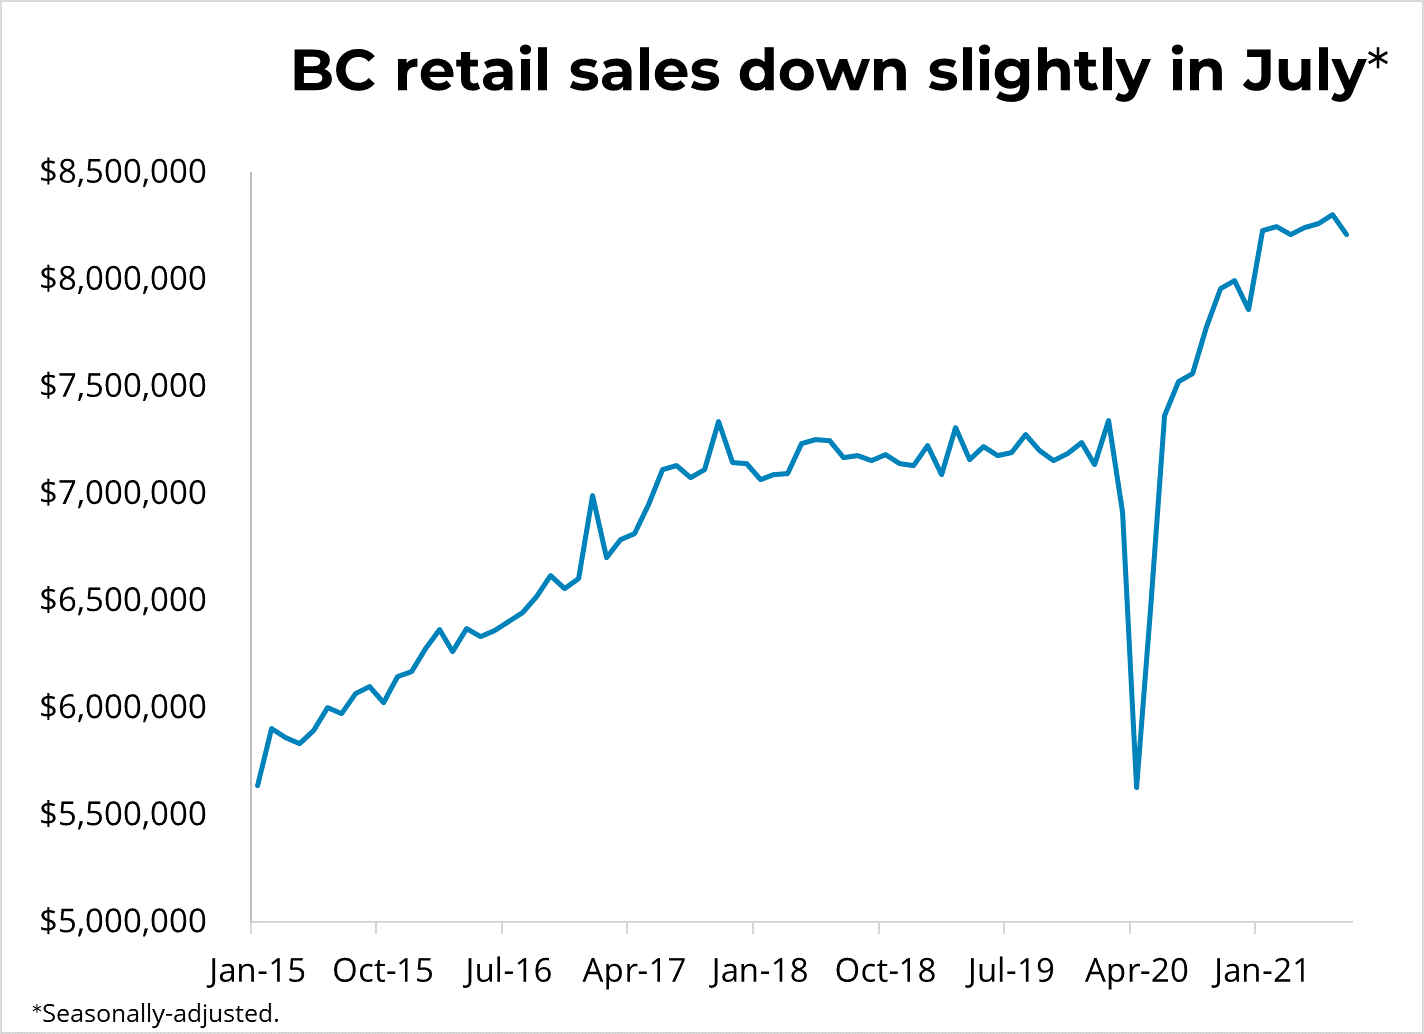 Canadian Retail Sales (July 2021) - September 23, 2021